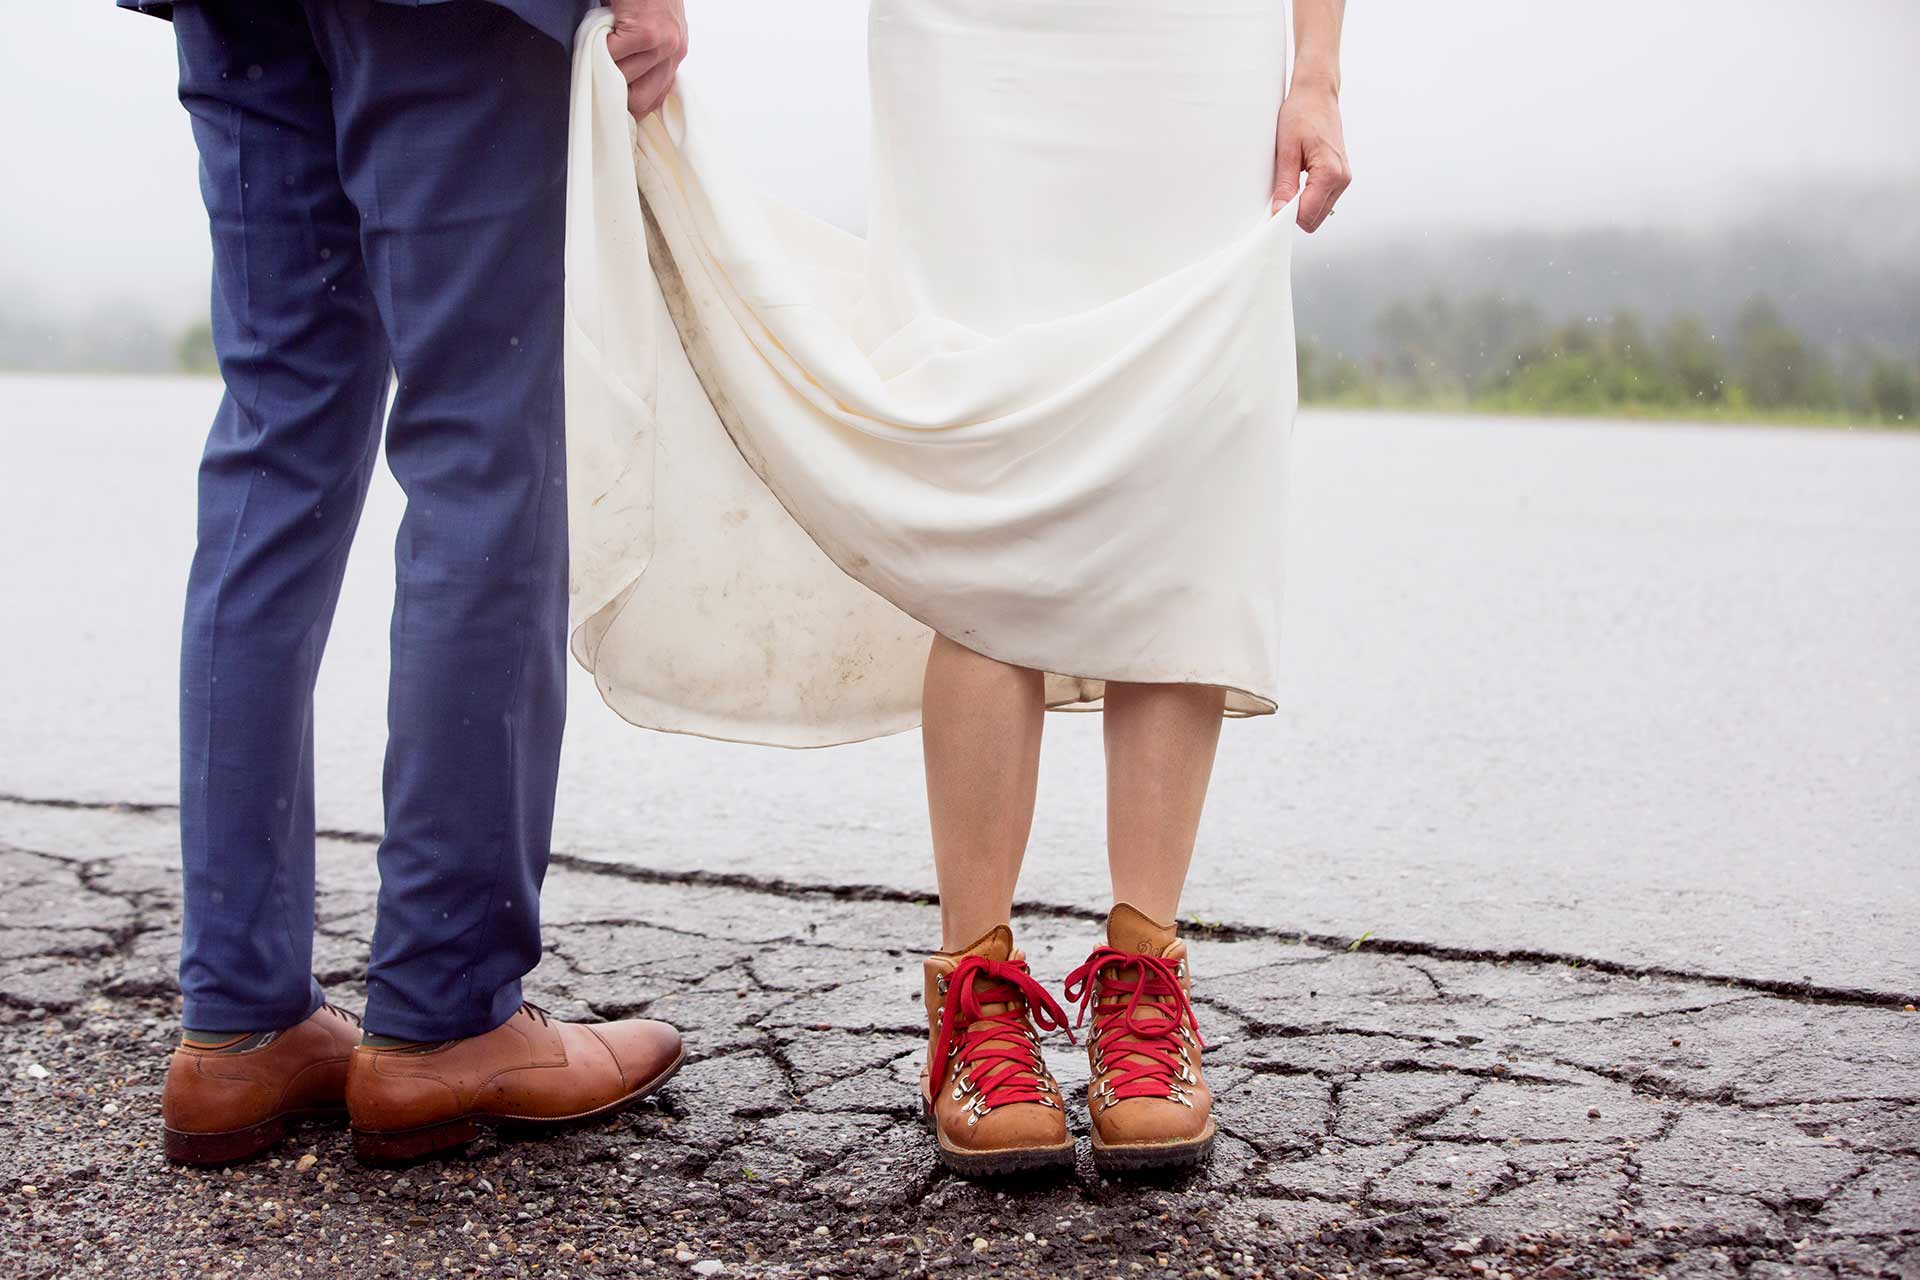 A bride rocking hiking boots on a wet rainy day.